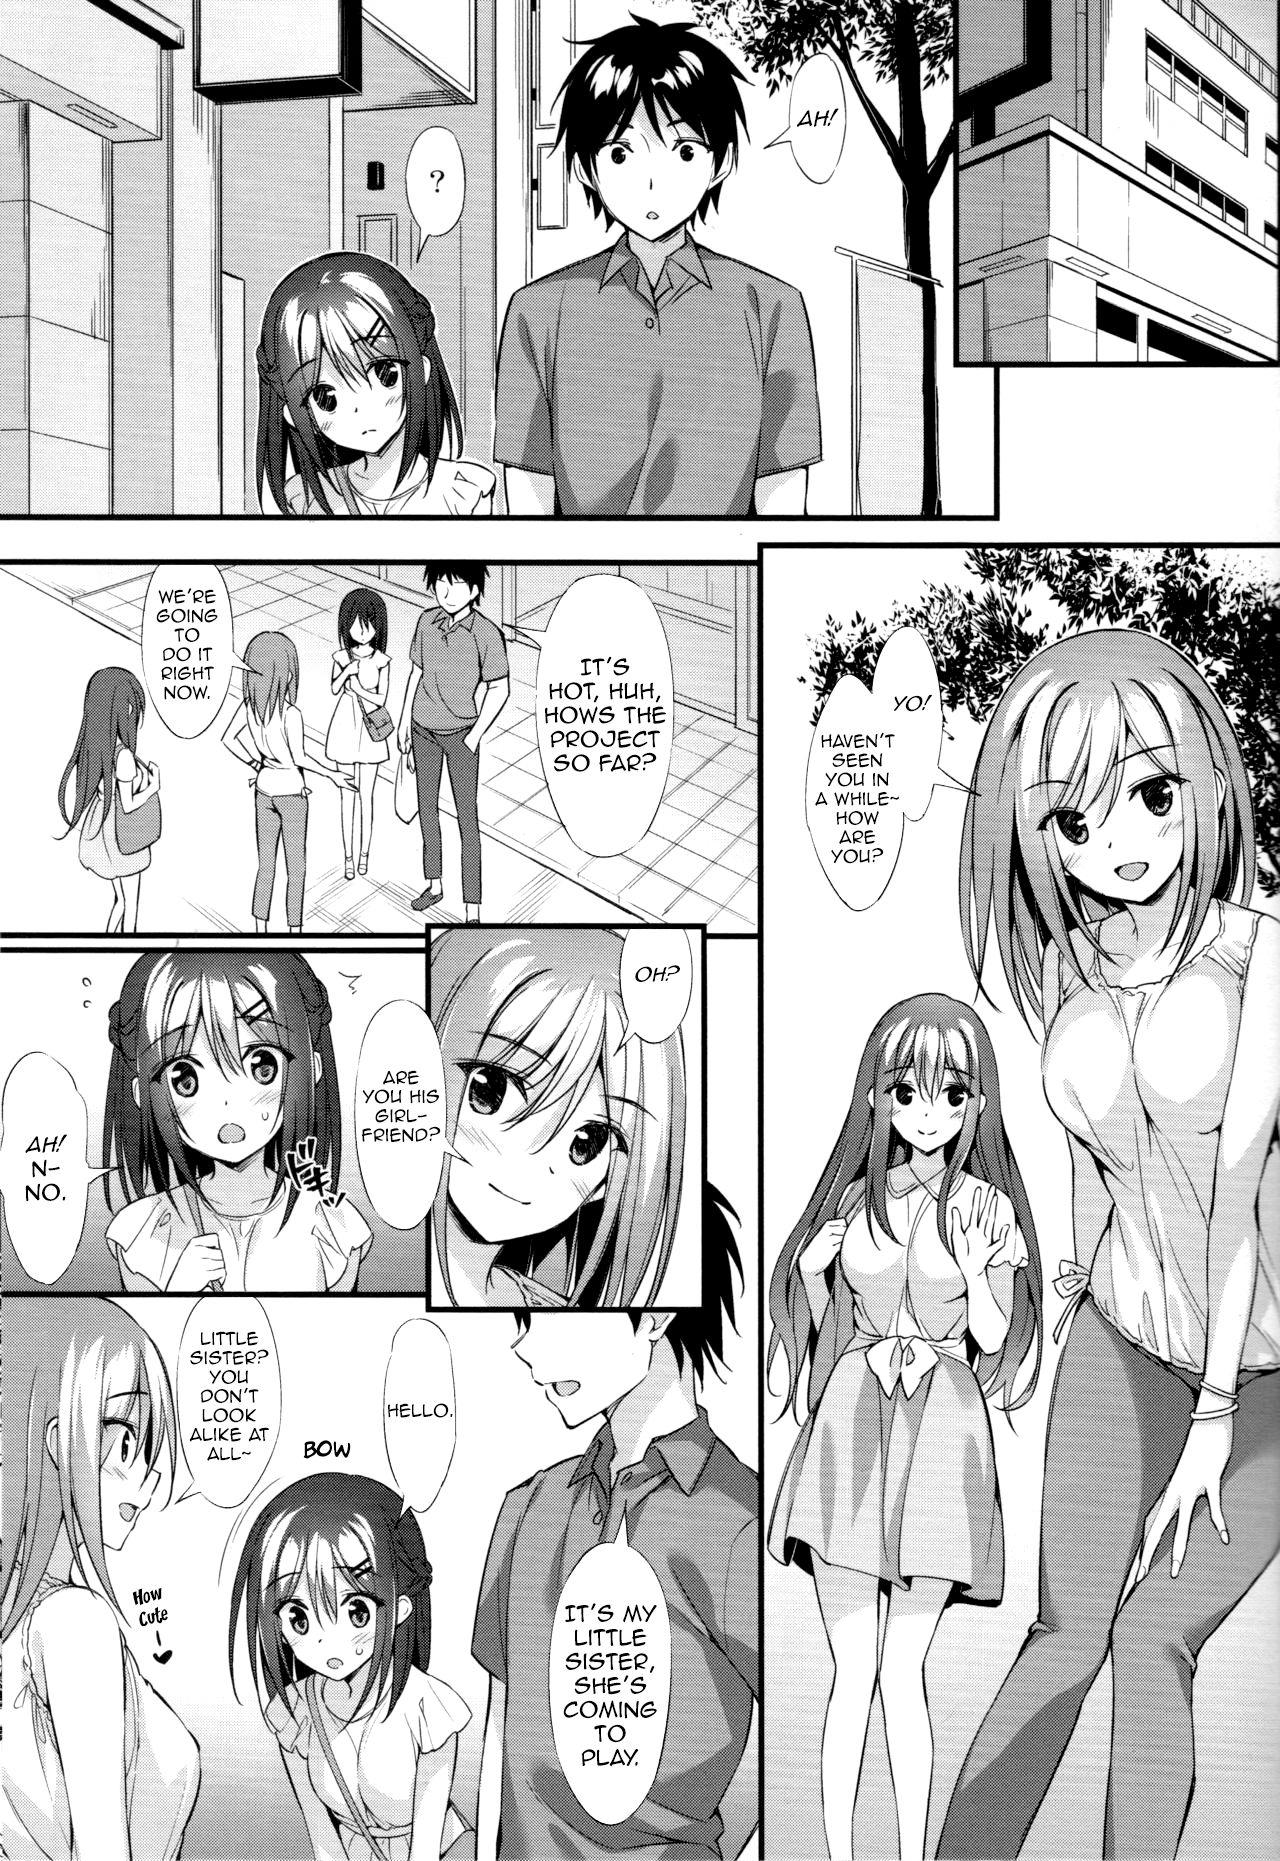 Urine (COMIC1☆13) [P:P (Oryou)] Onii-chan, Hitorijime Shitai no...! | I want you all for myself Onii-chan...! [English] [Comfy Pillow Scans] - Original Gostoso - Page 2